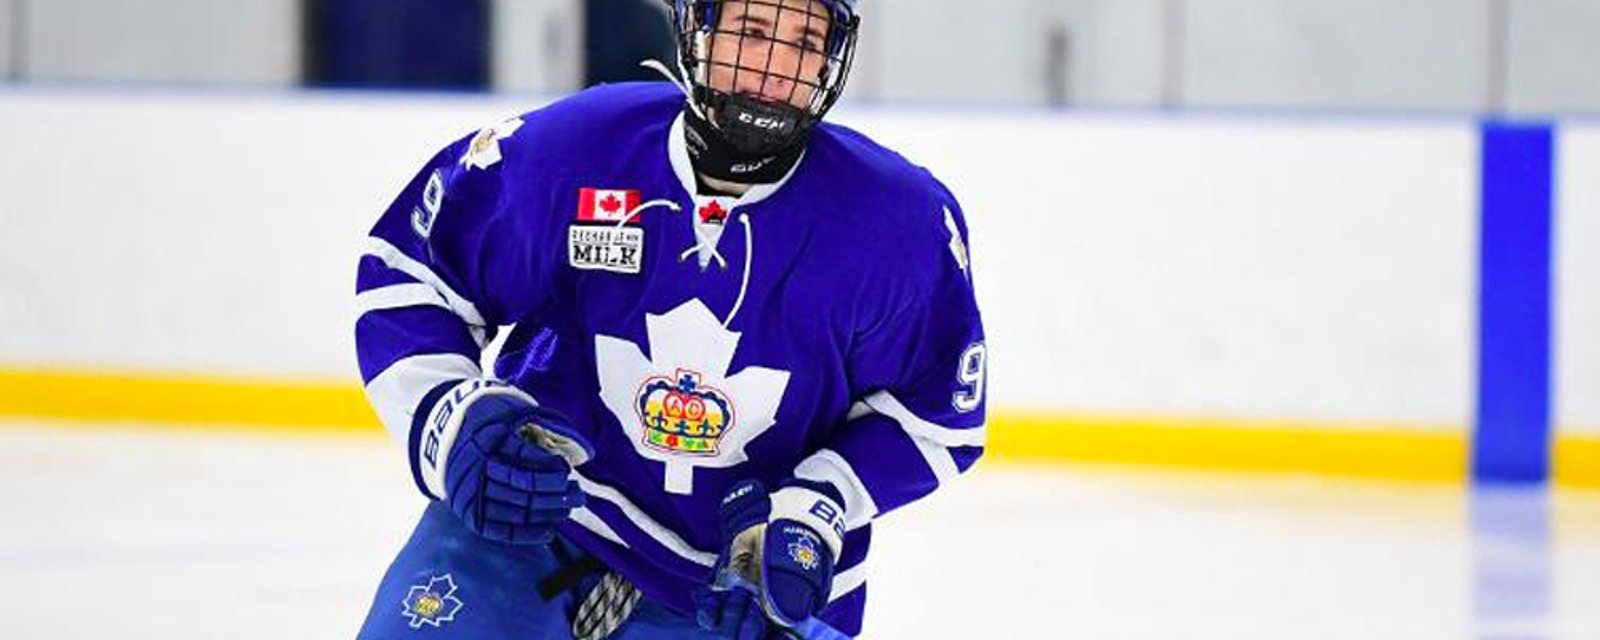 Prospect Logan Mailloux renounces himself from NHL Draft following criminal charges 